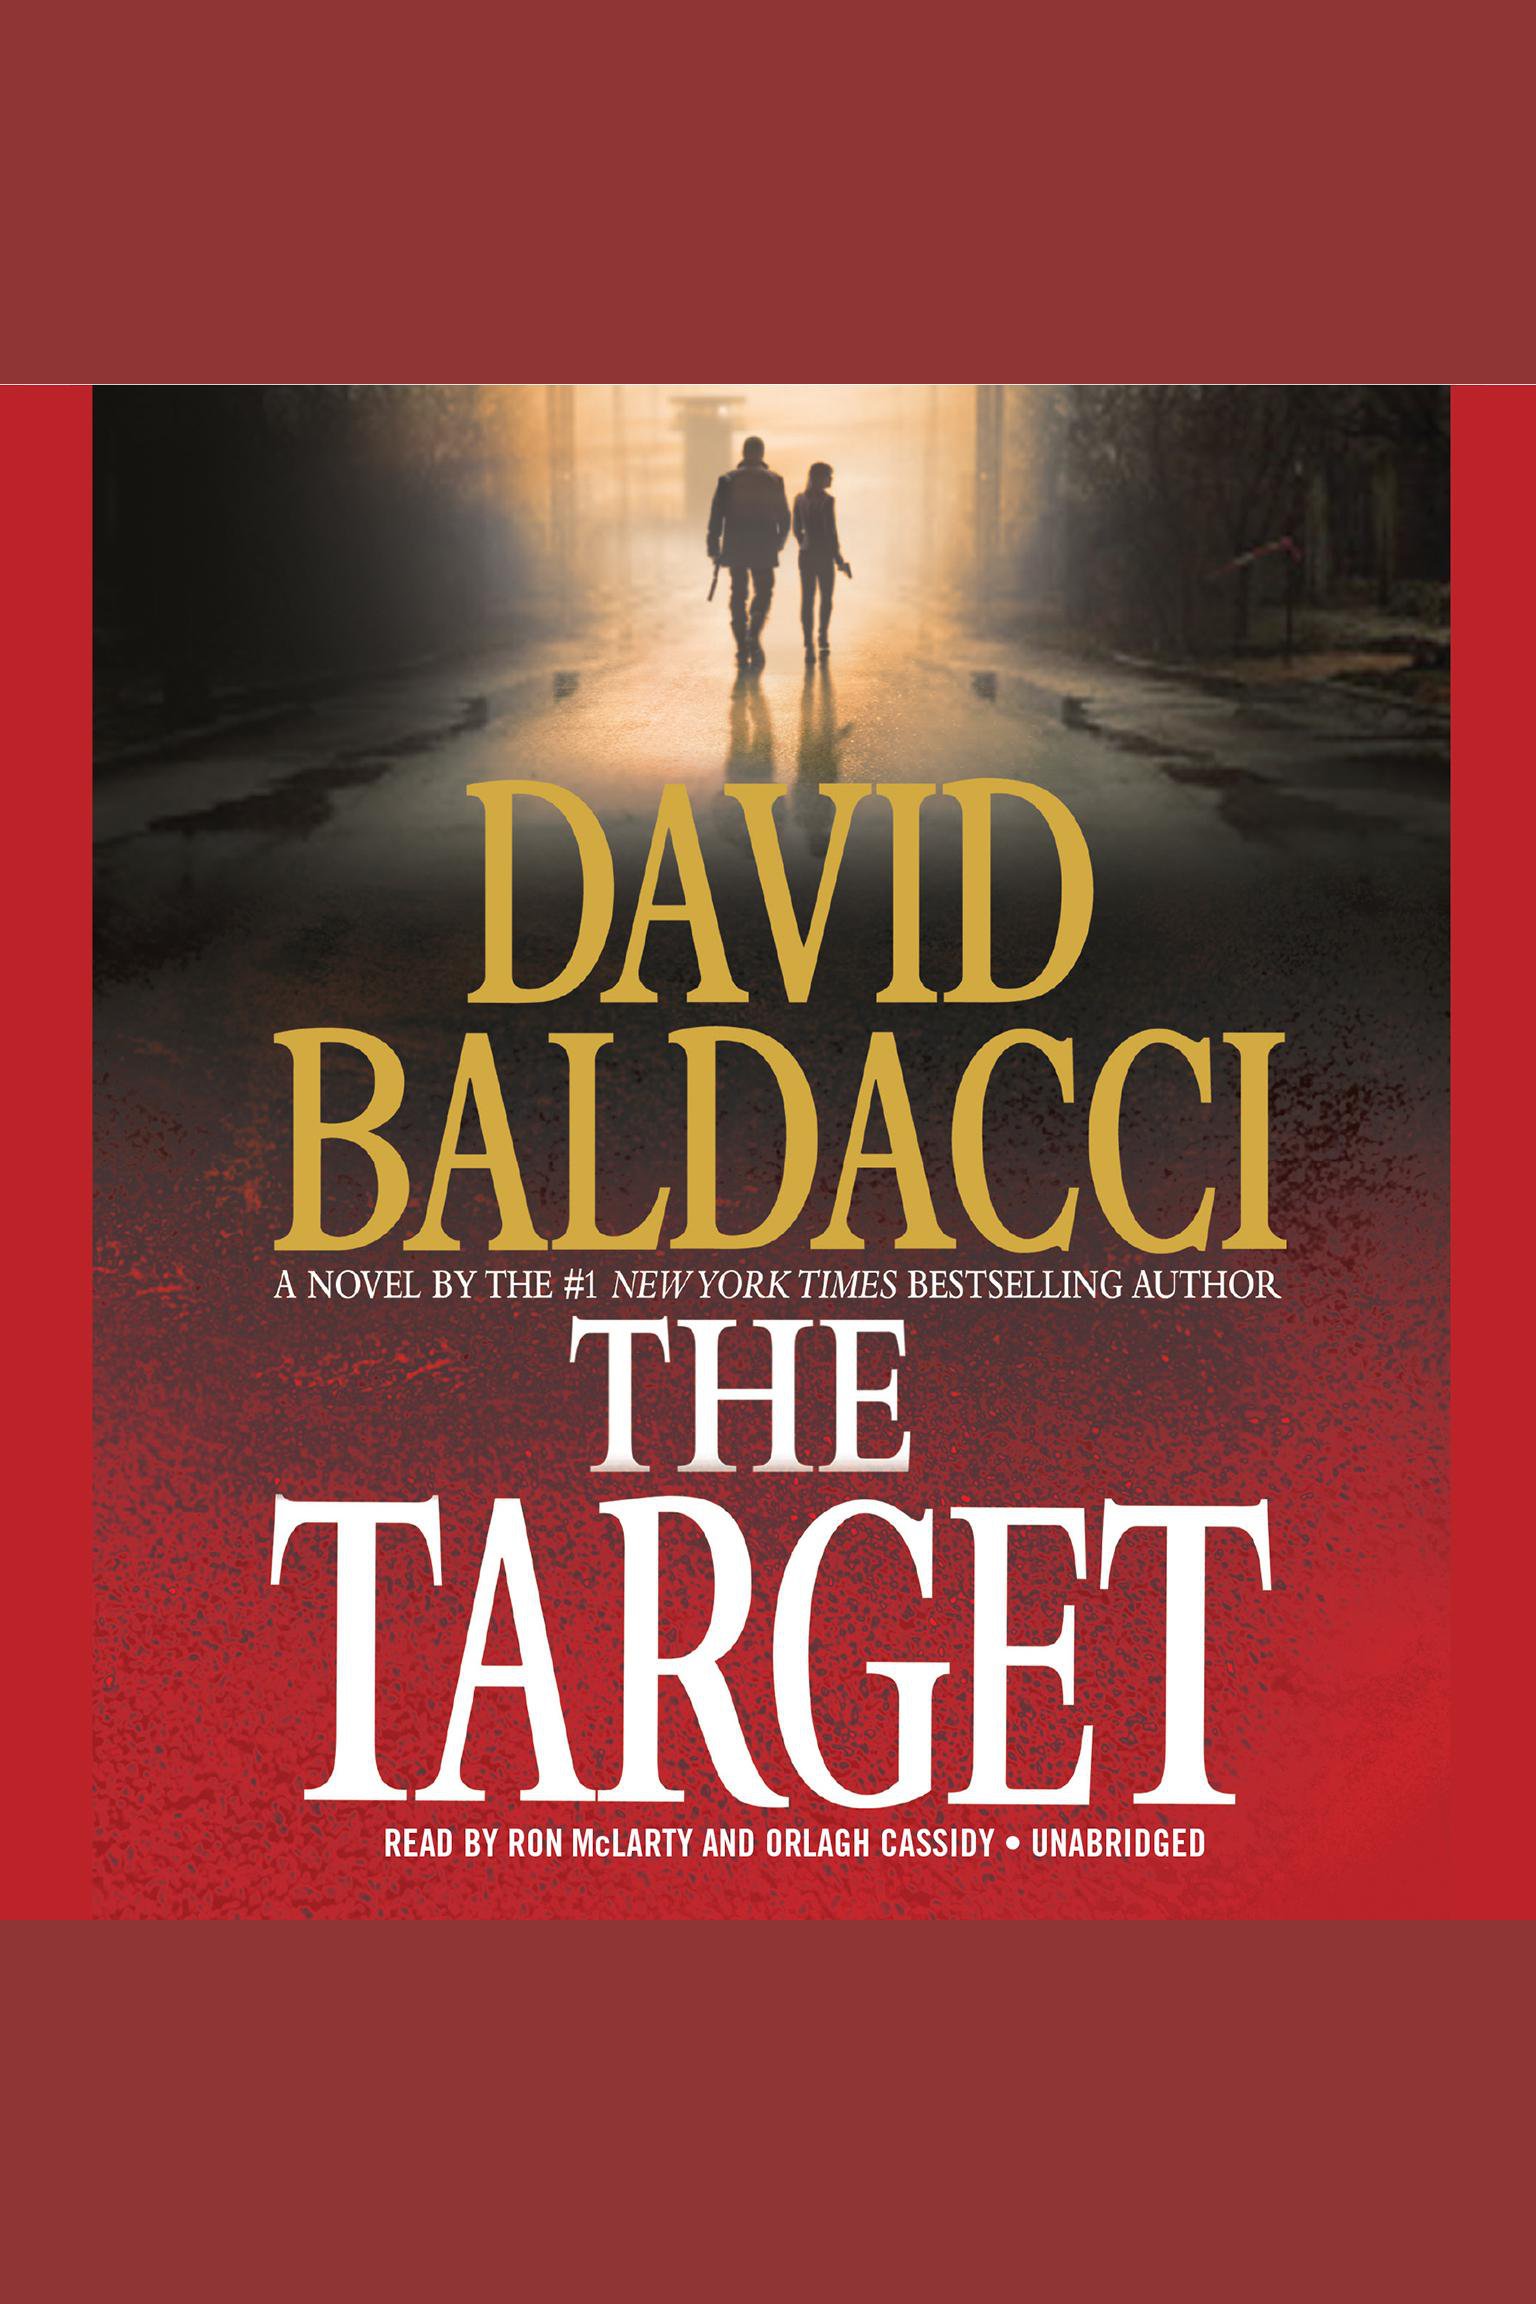 The target cover image